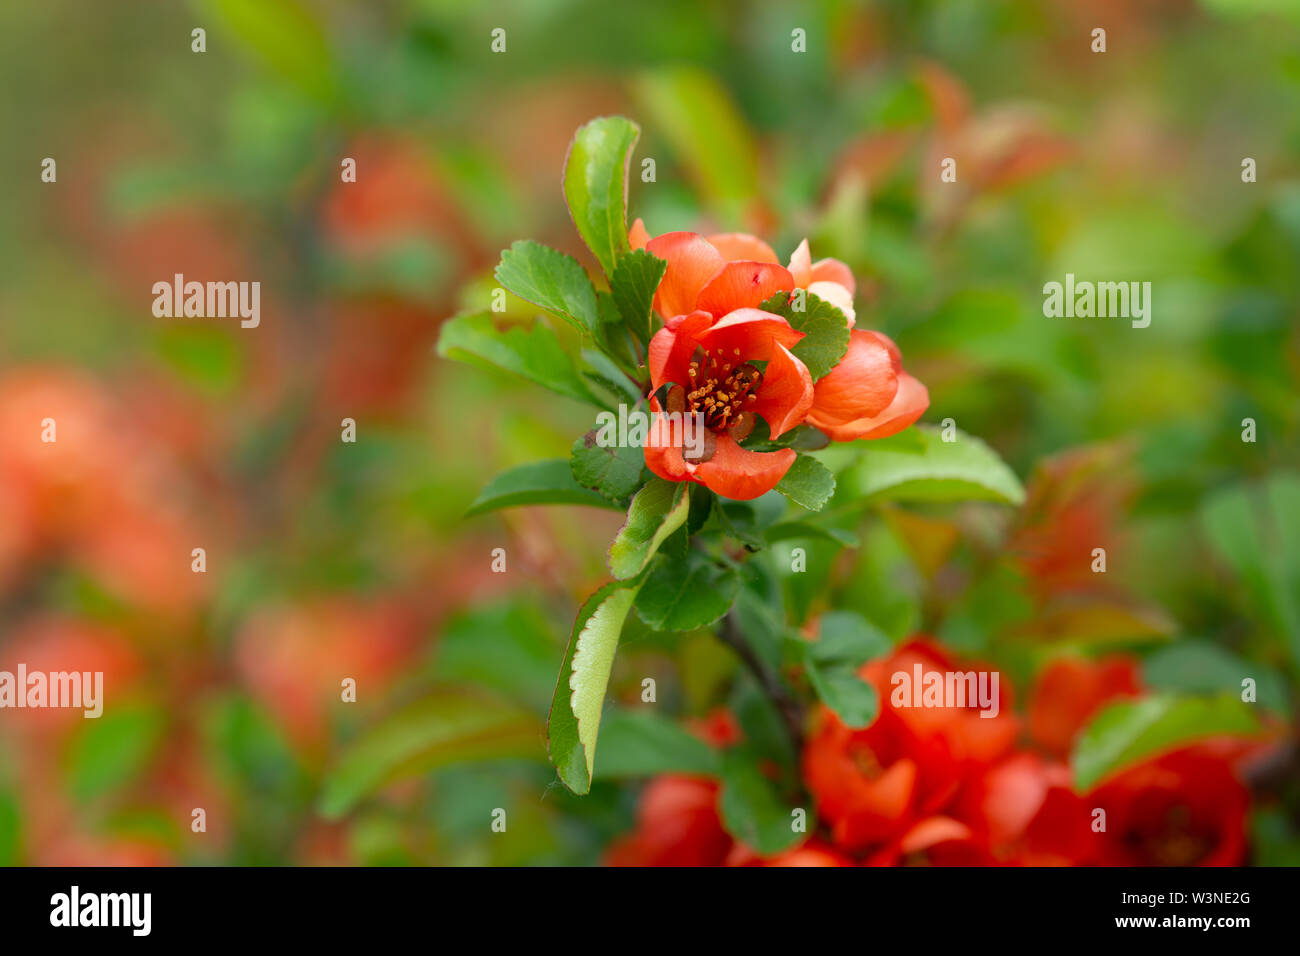 Green leaves and red flowers of flowering quince or Chaenomeles japonica, Maule quince garden plant in spring Stock Photo